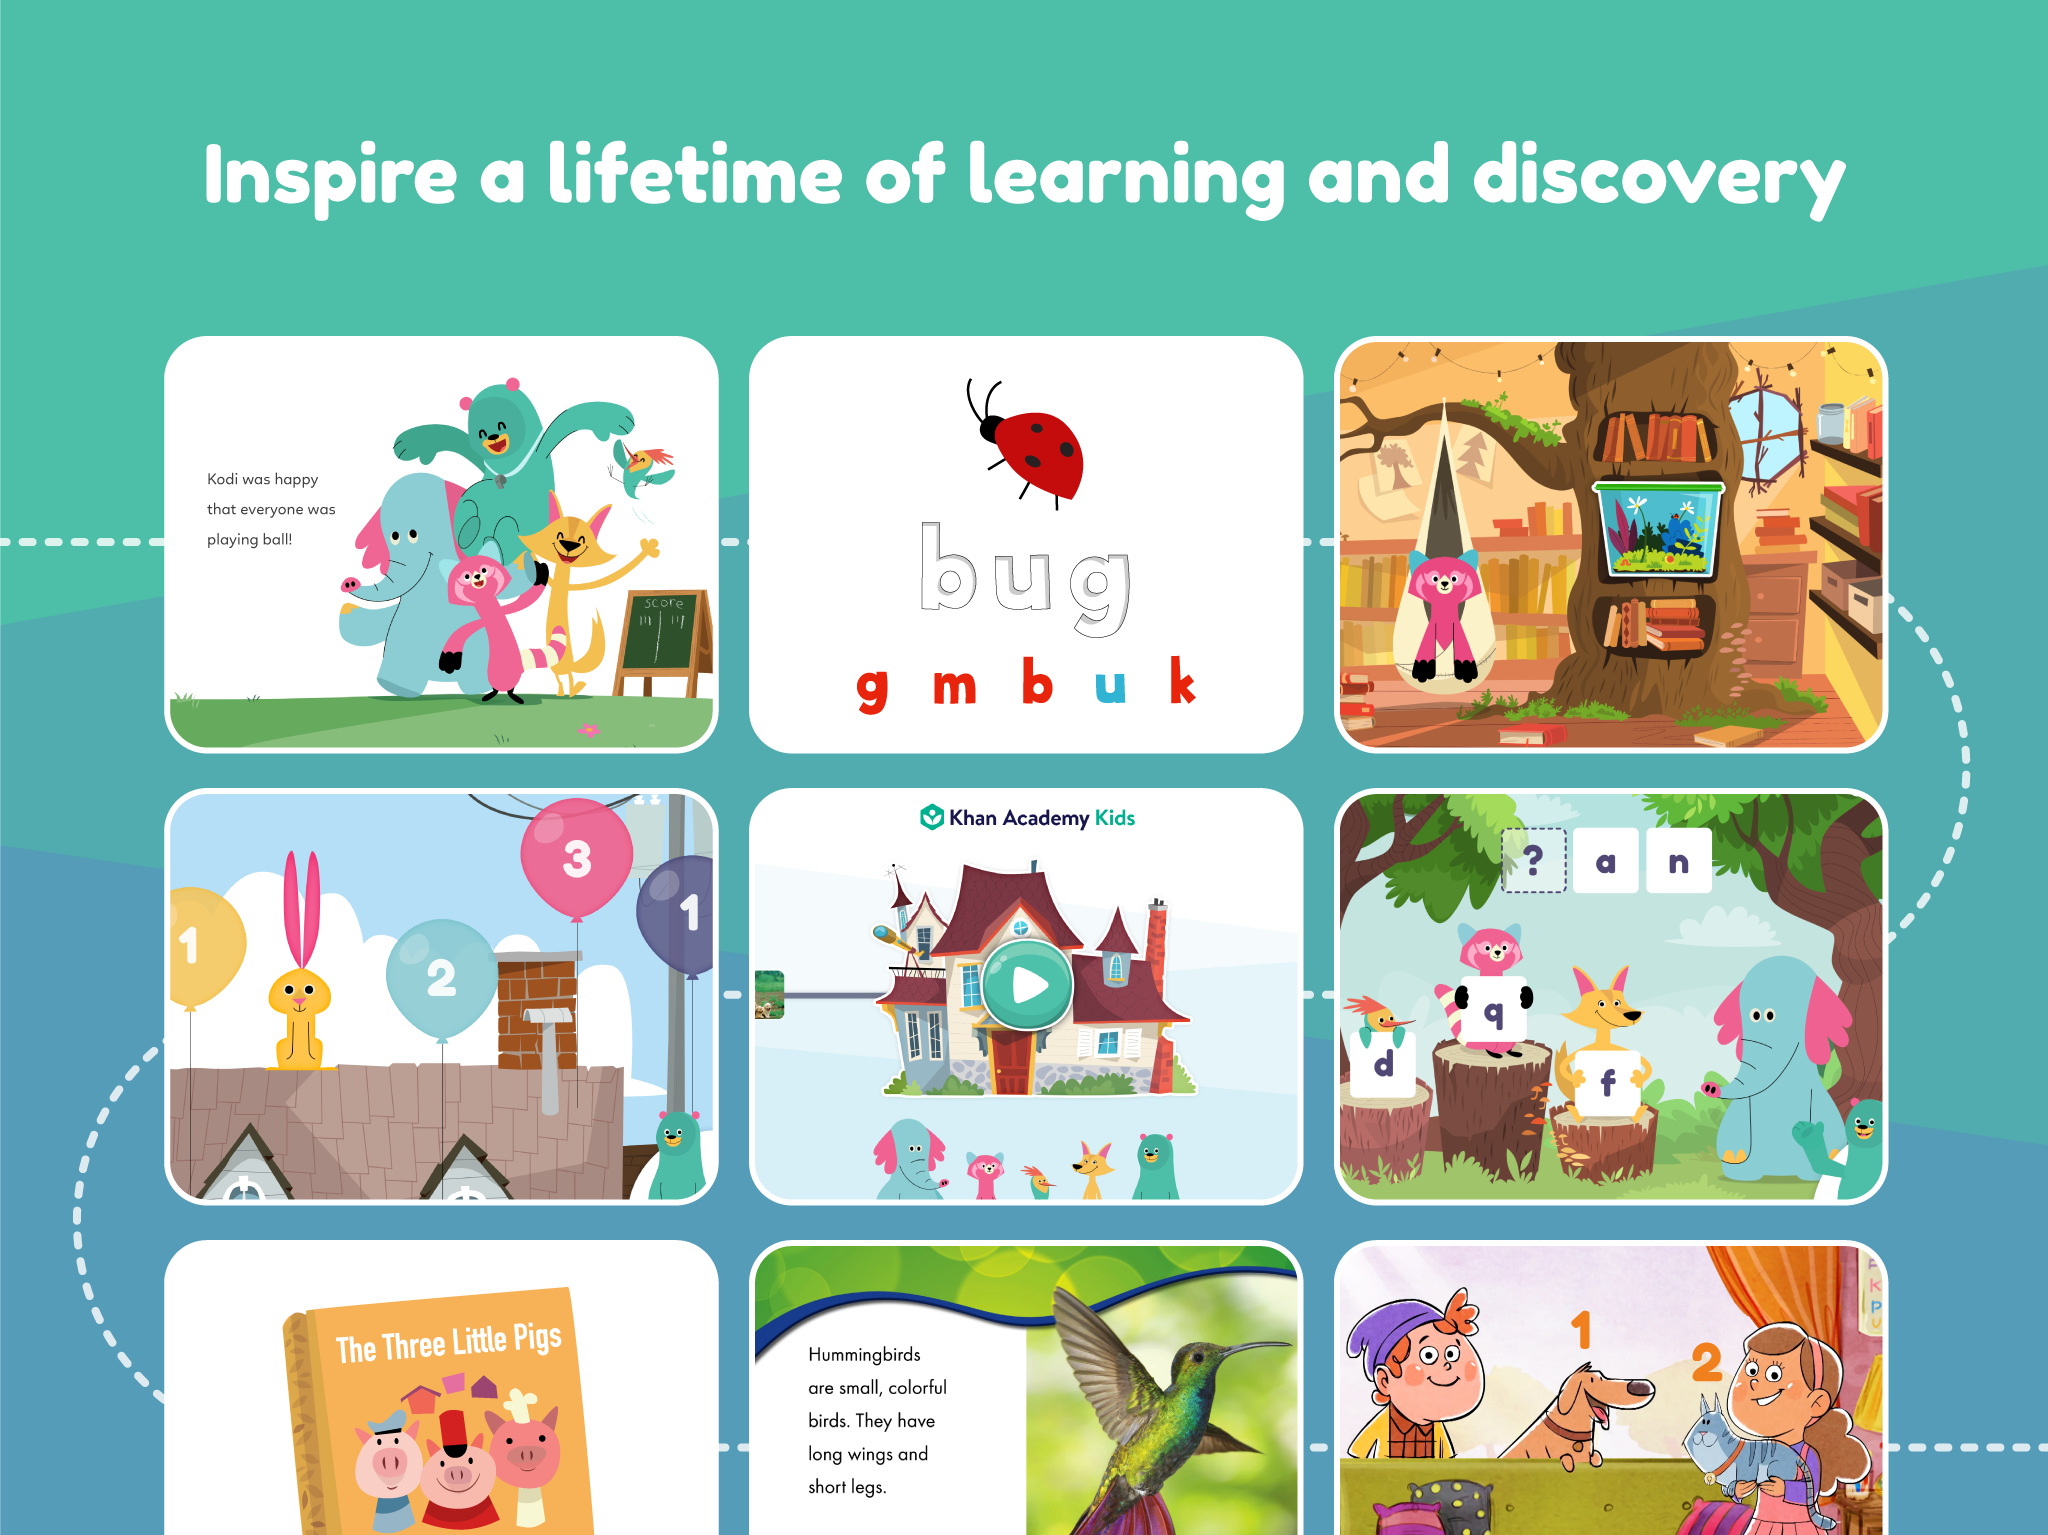 khan-academy-kids-launches-today-super-simple